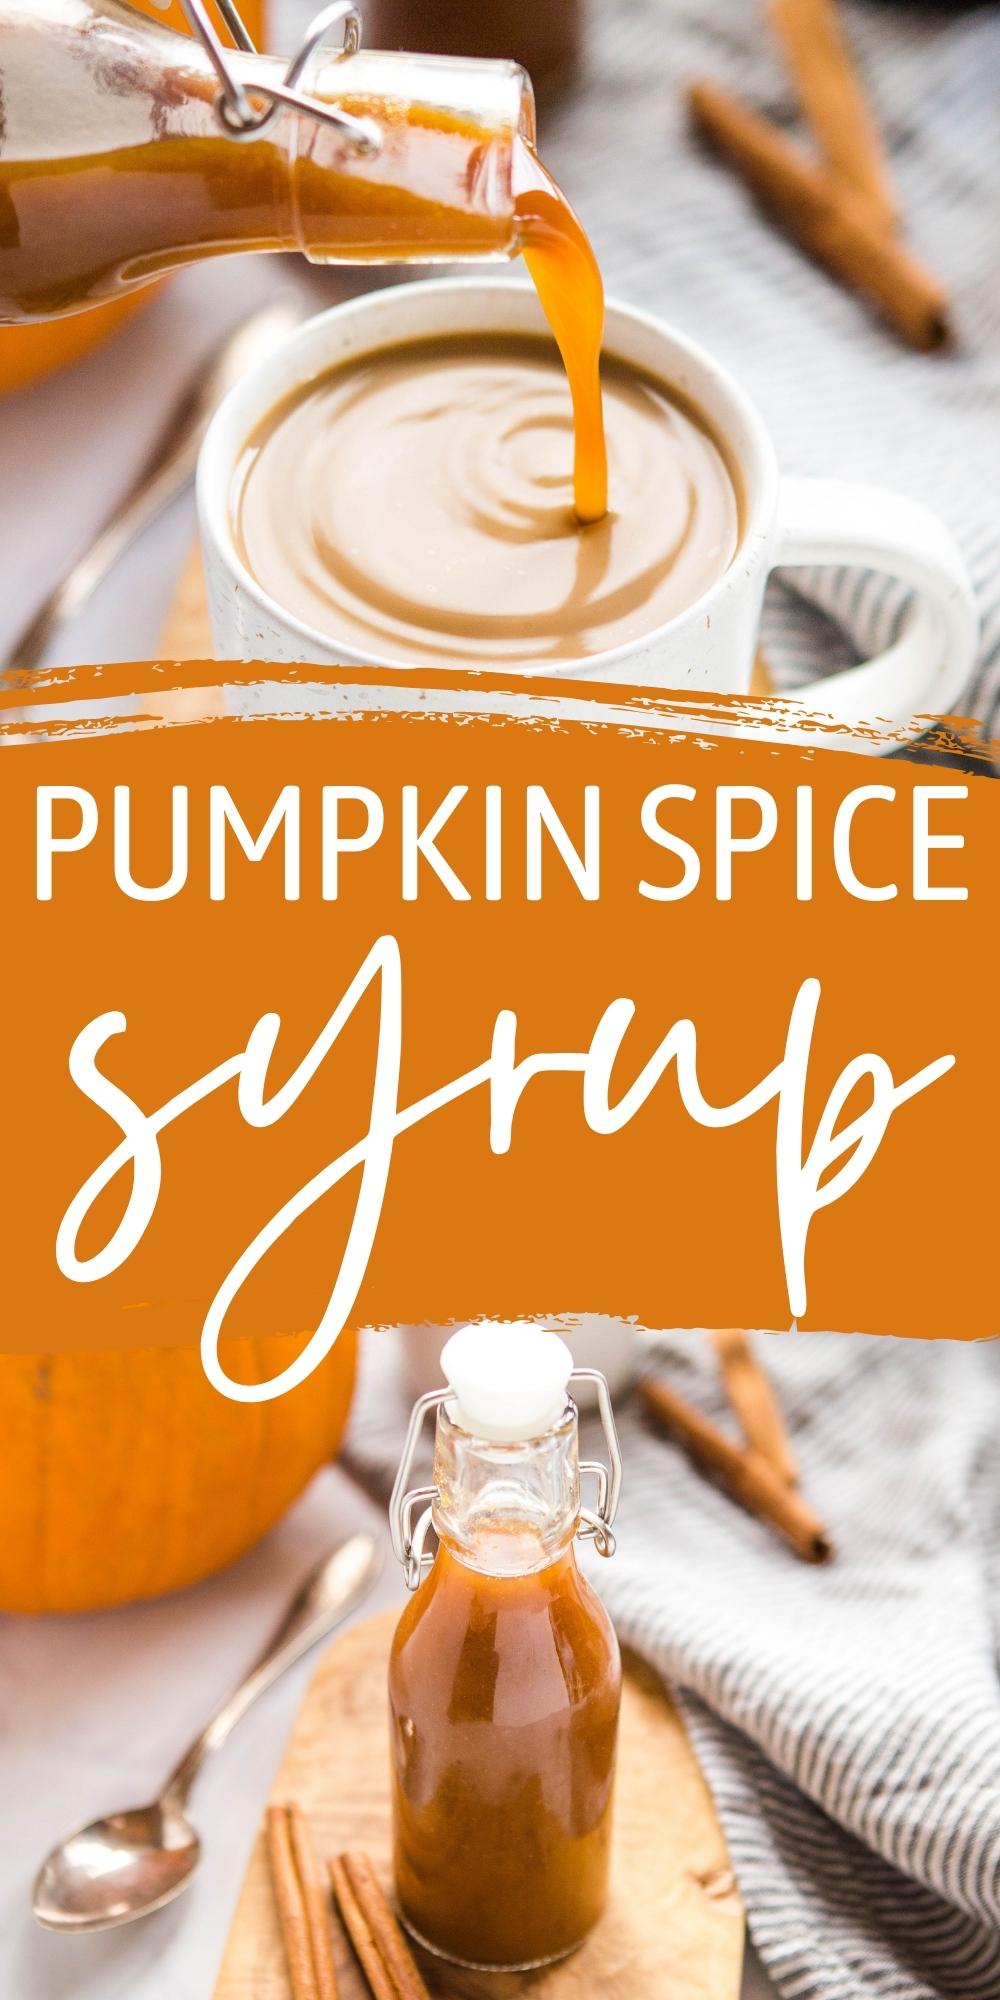 This Pumpkin Spice Syrup is the perfect addition to all your fall drinks. Easy to make and perfect for waffles, pancakes and desserts! Recipe from thebusybaker.ca! #pumpkinspicesyrup #pumpkinspice #syrup #fallrecipe #pumpkinspice via @busybakerblog